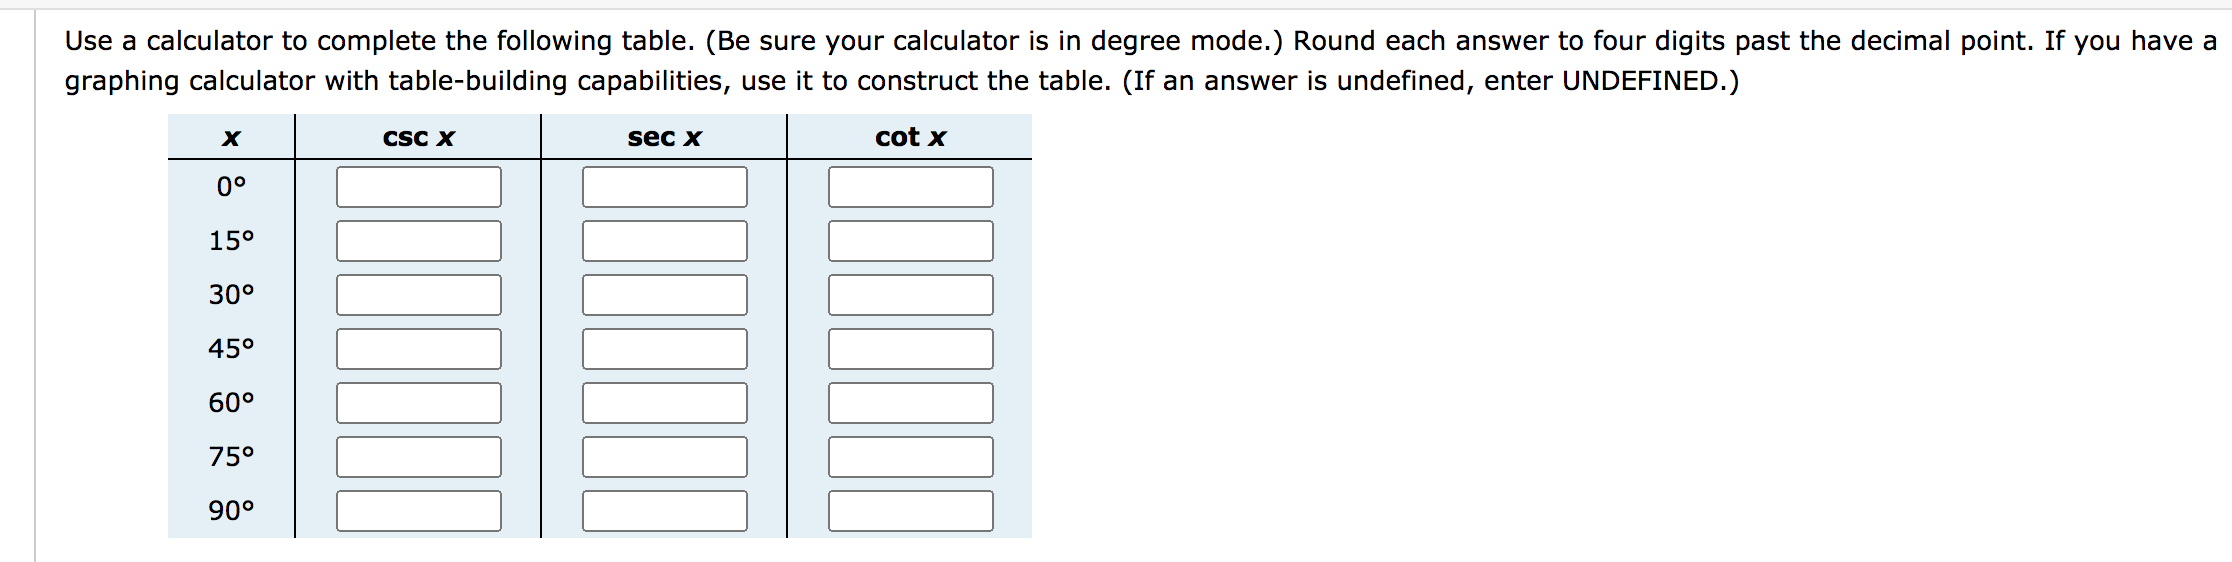 Use a calculator to complete the following table. (Be sure your calculator is in degree mode.) Round each answer to four digits past the decimal point. If you have a
graphing calculator with table-building capabilities, use it to construct the table. (If an answer is undefined, enter UNDEFINED.)
X
CSC X
sec x
cot x
0°
